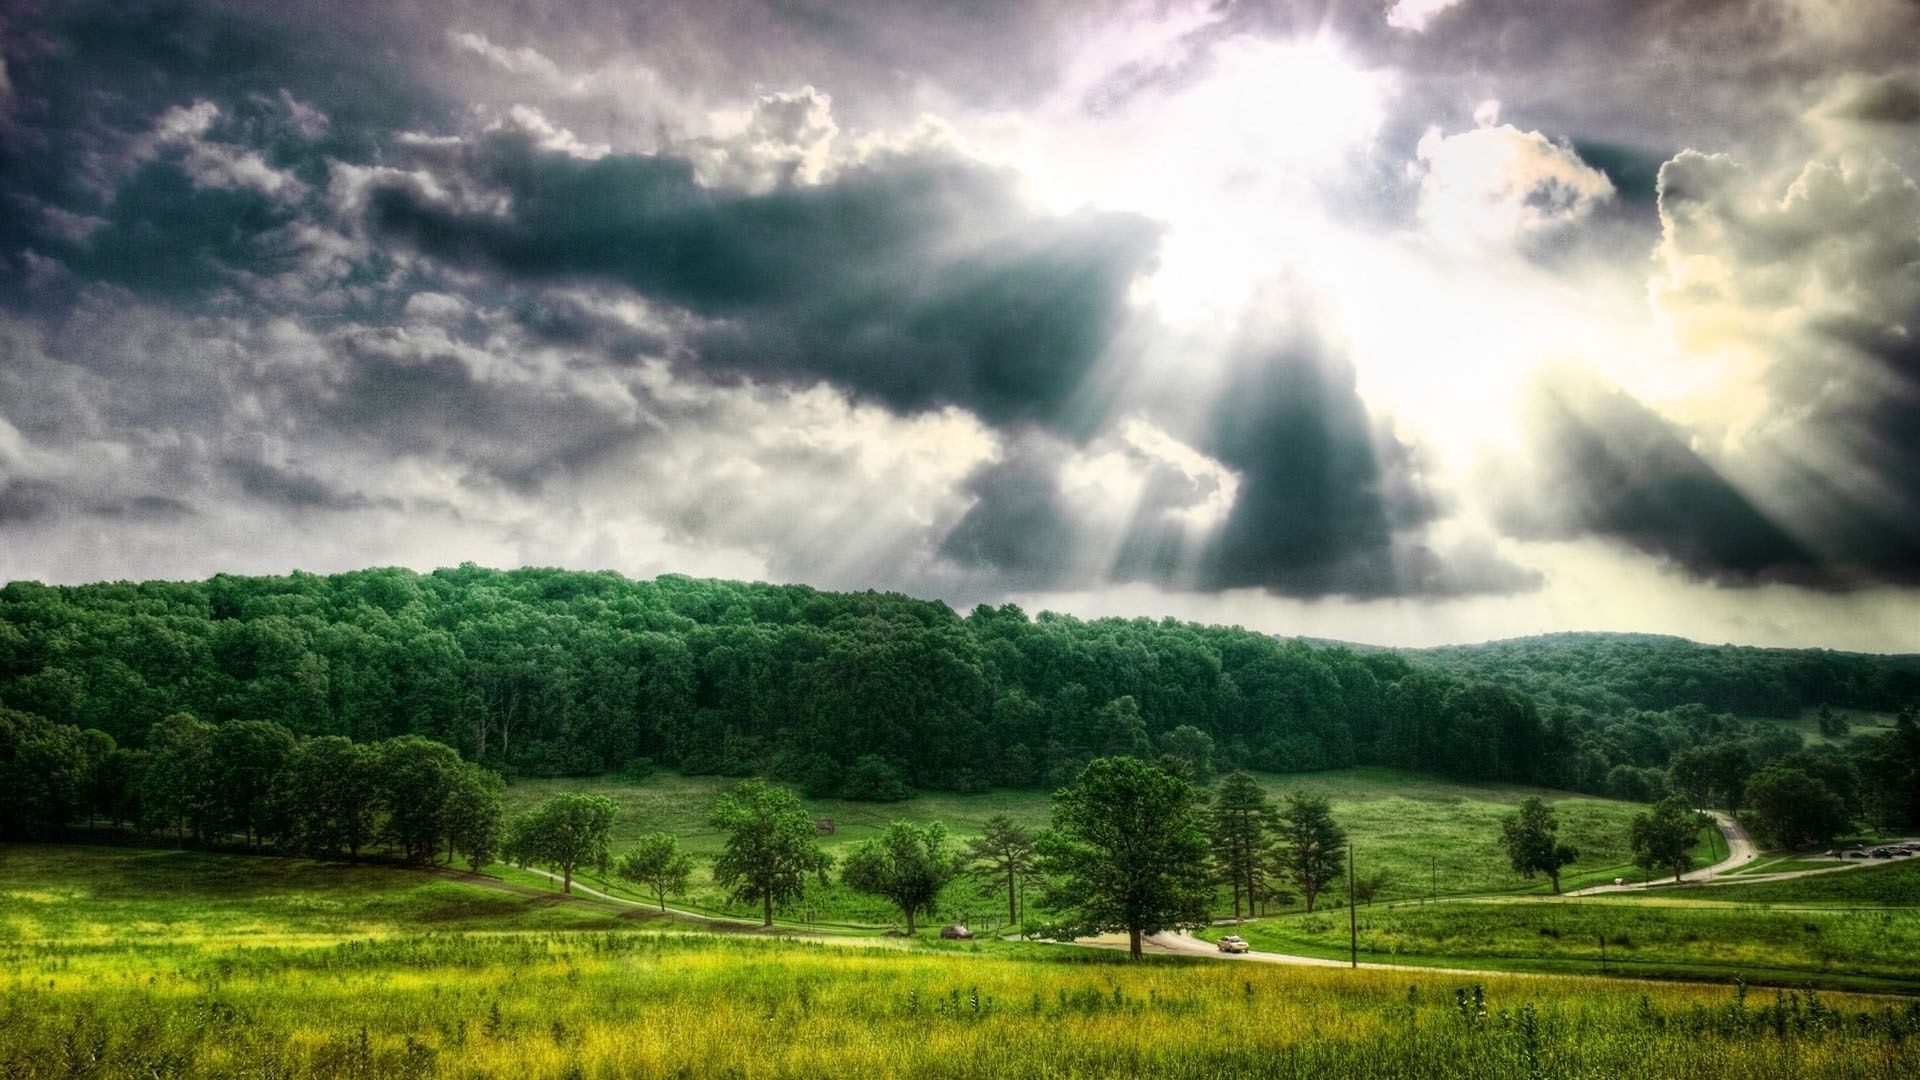 the sunlight and rays landscape nature rural sky tree agriculture outdoors countryside summer field cloud wood grass rain farm cropland cloudy fair weather storm